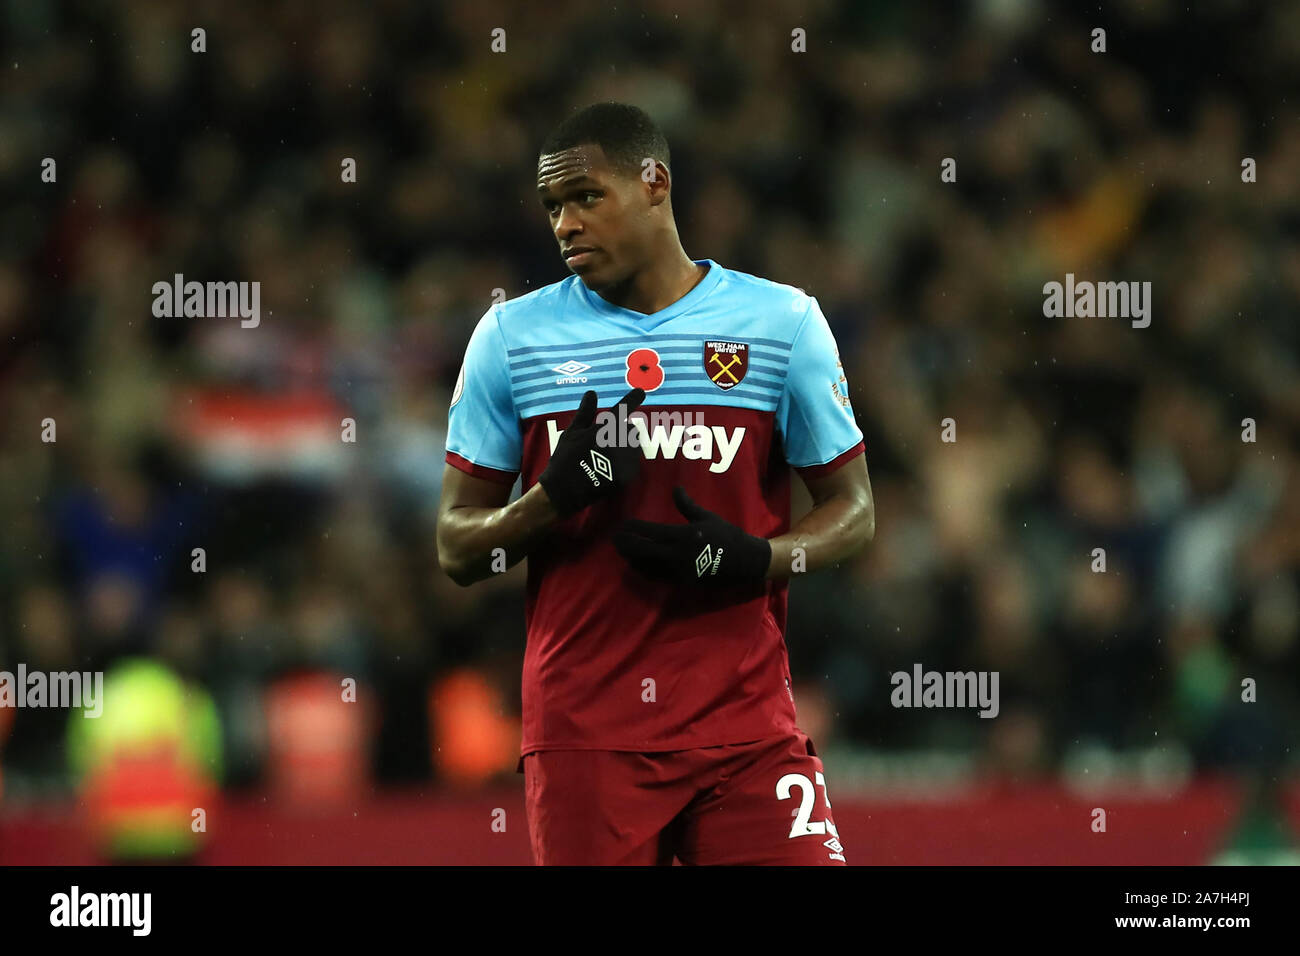 LONDON, ENGLAND NOVEMBER 2ND West Ham's Issa Diop during the Premier League match between West Ham United and Newcastle United at the Boleyn Ground, London on Saturday 2nd November 2019. (Credit: Leila Coker | MI News) Photograph may only be used for newspaper and/or magazine editorial purposes, license required for commercial use Credit: MI News & Sport /Alamy Live News Stock Photo